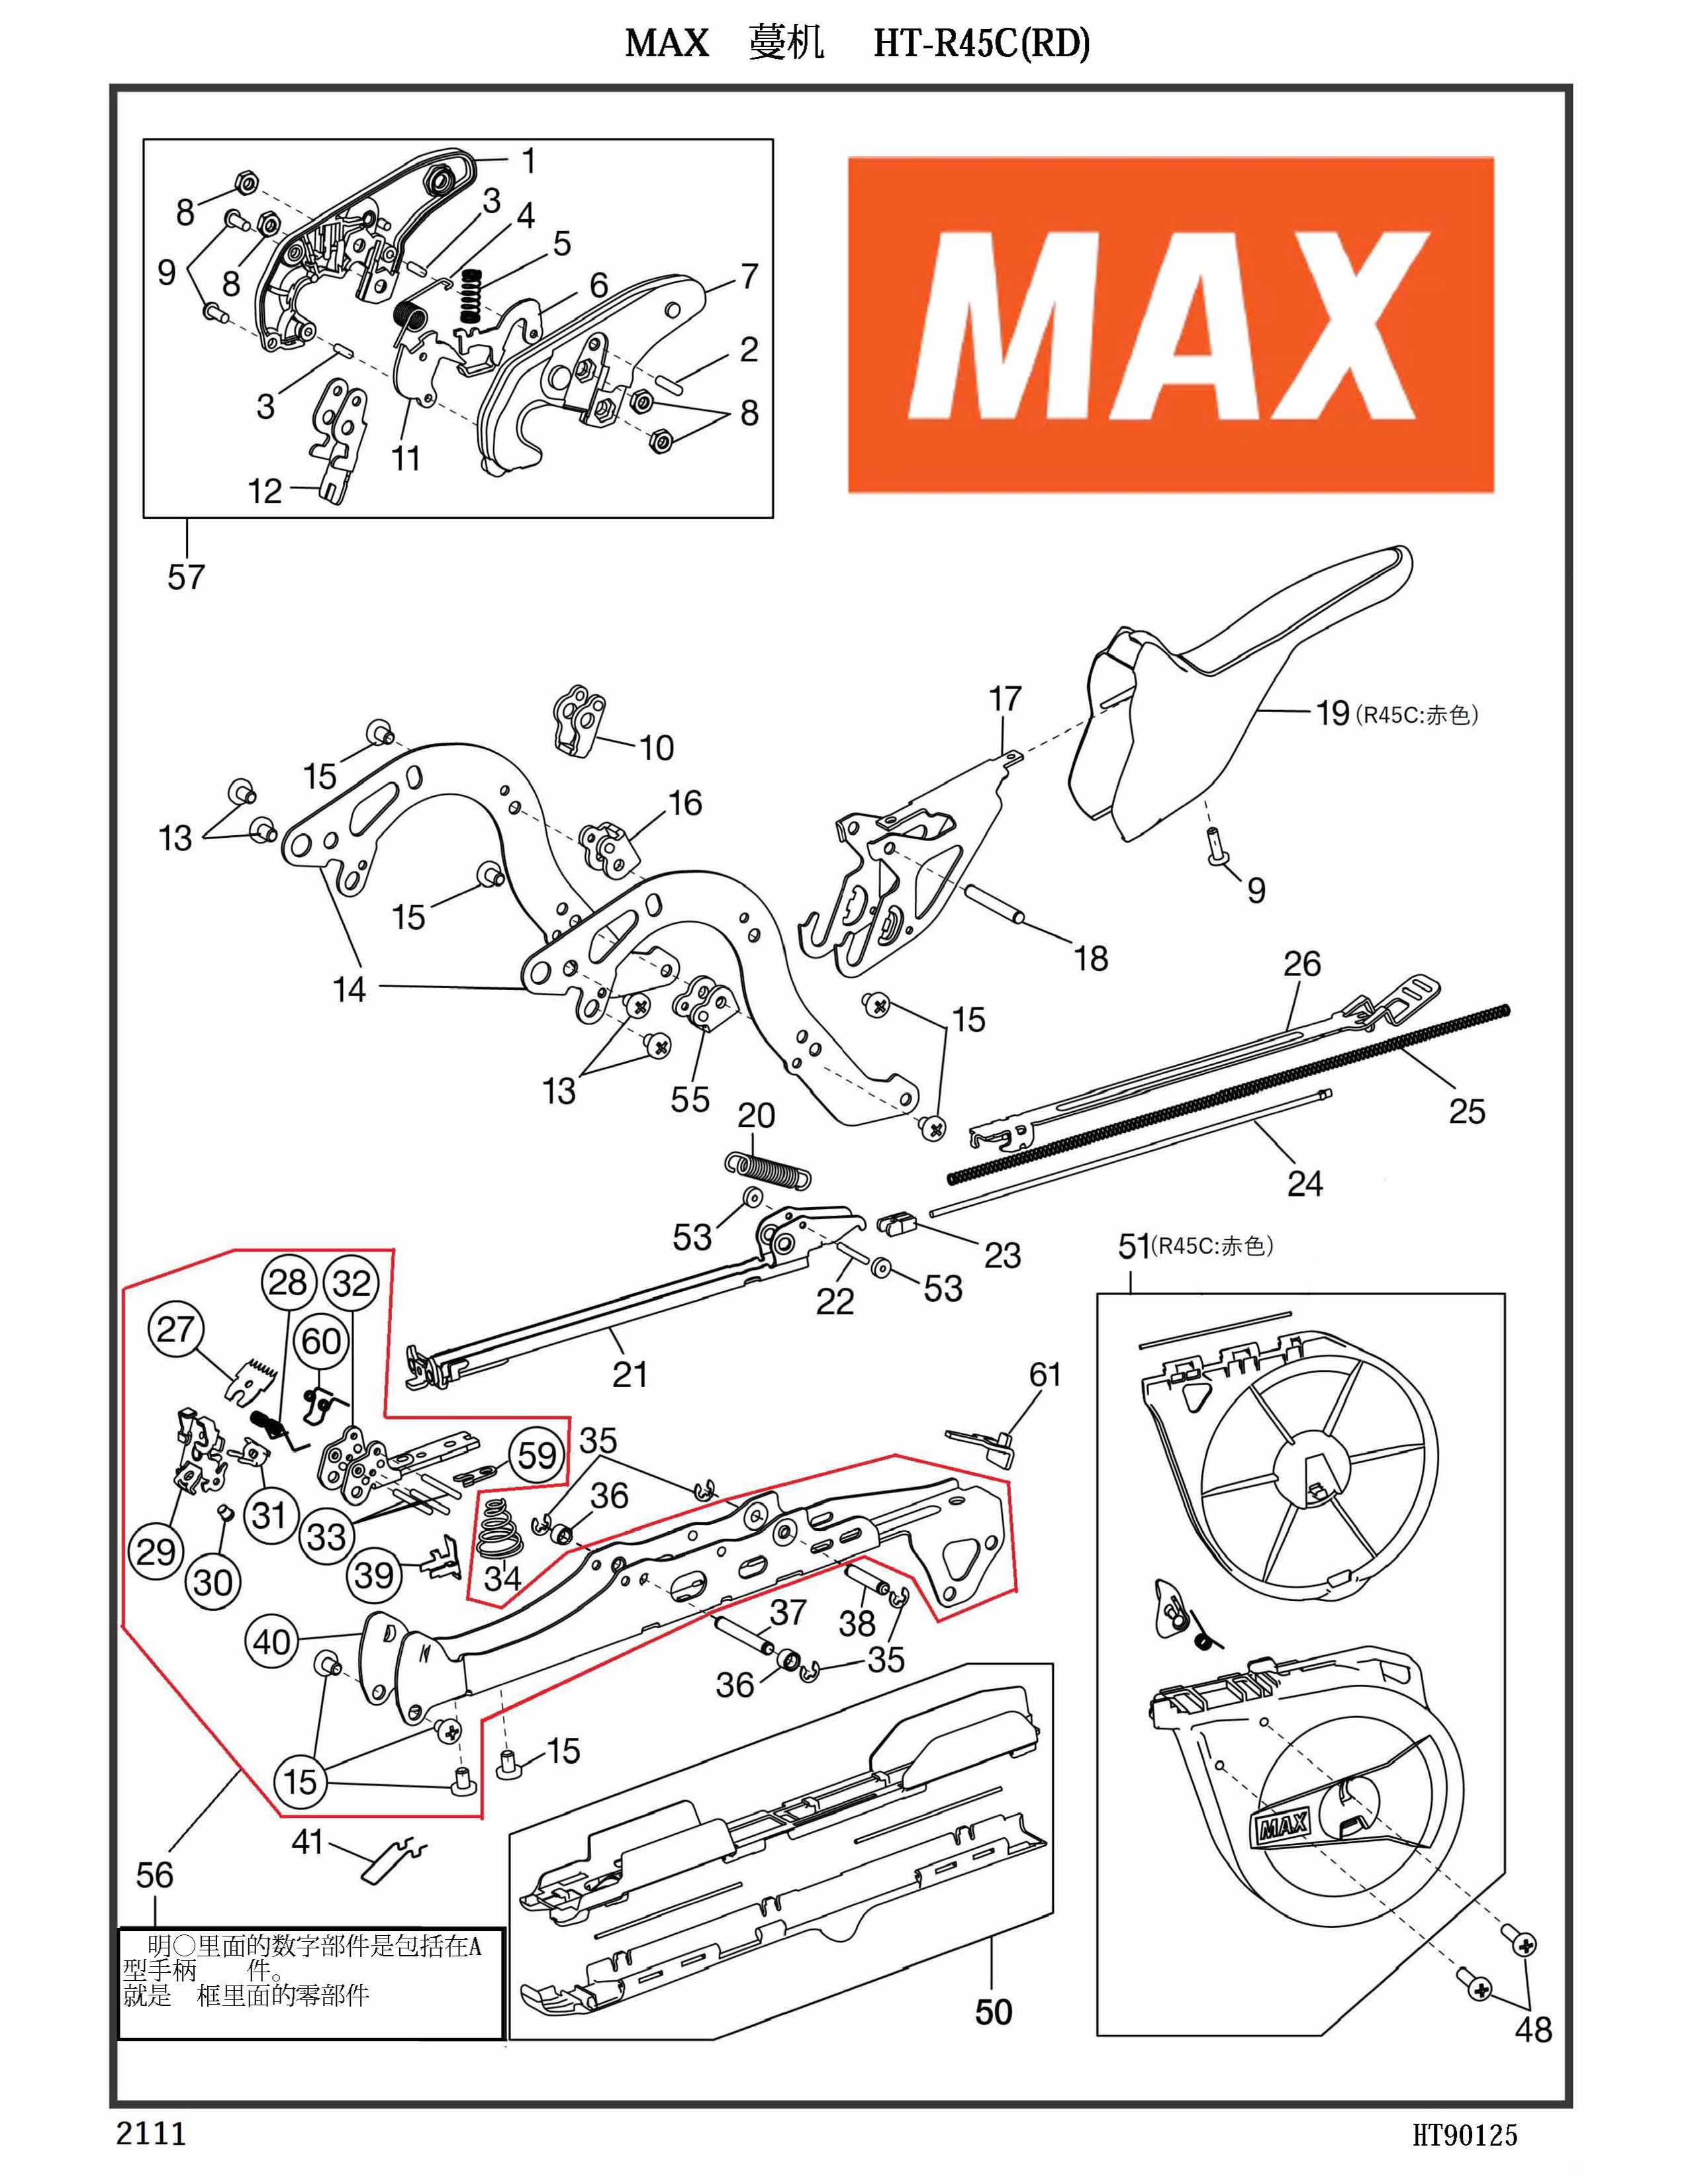 MAX Tapener Part HT11697 ARM SUPPORT S (HT-R) Fits MAX HT-R45L(O) R45C(RD) HT-S45E #55